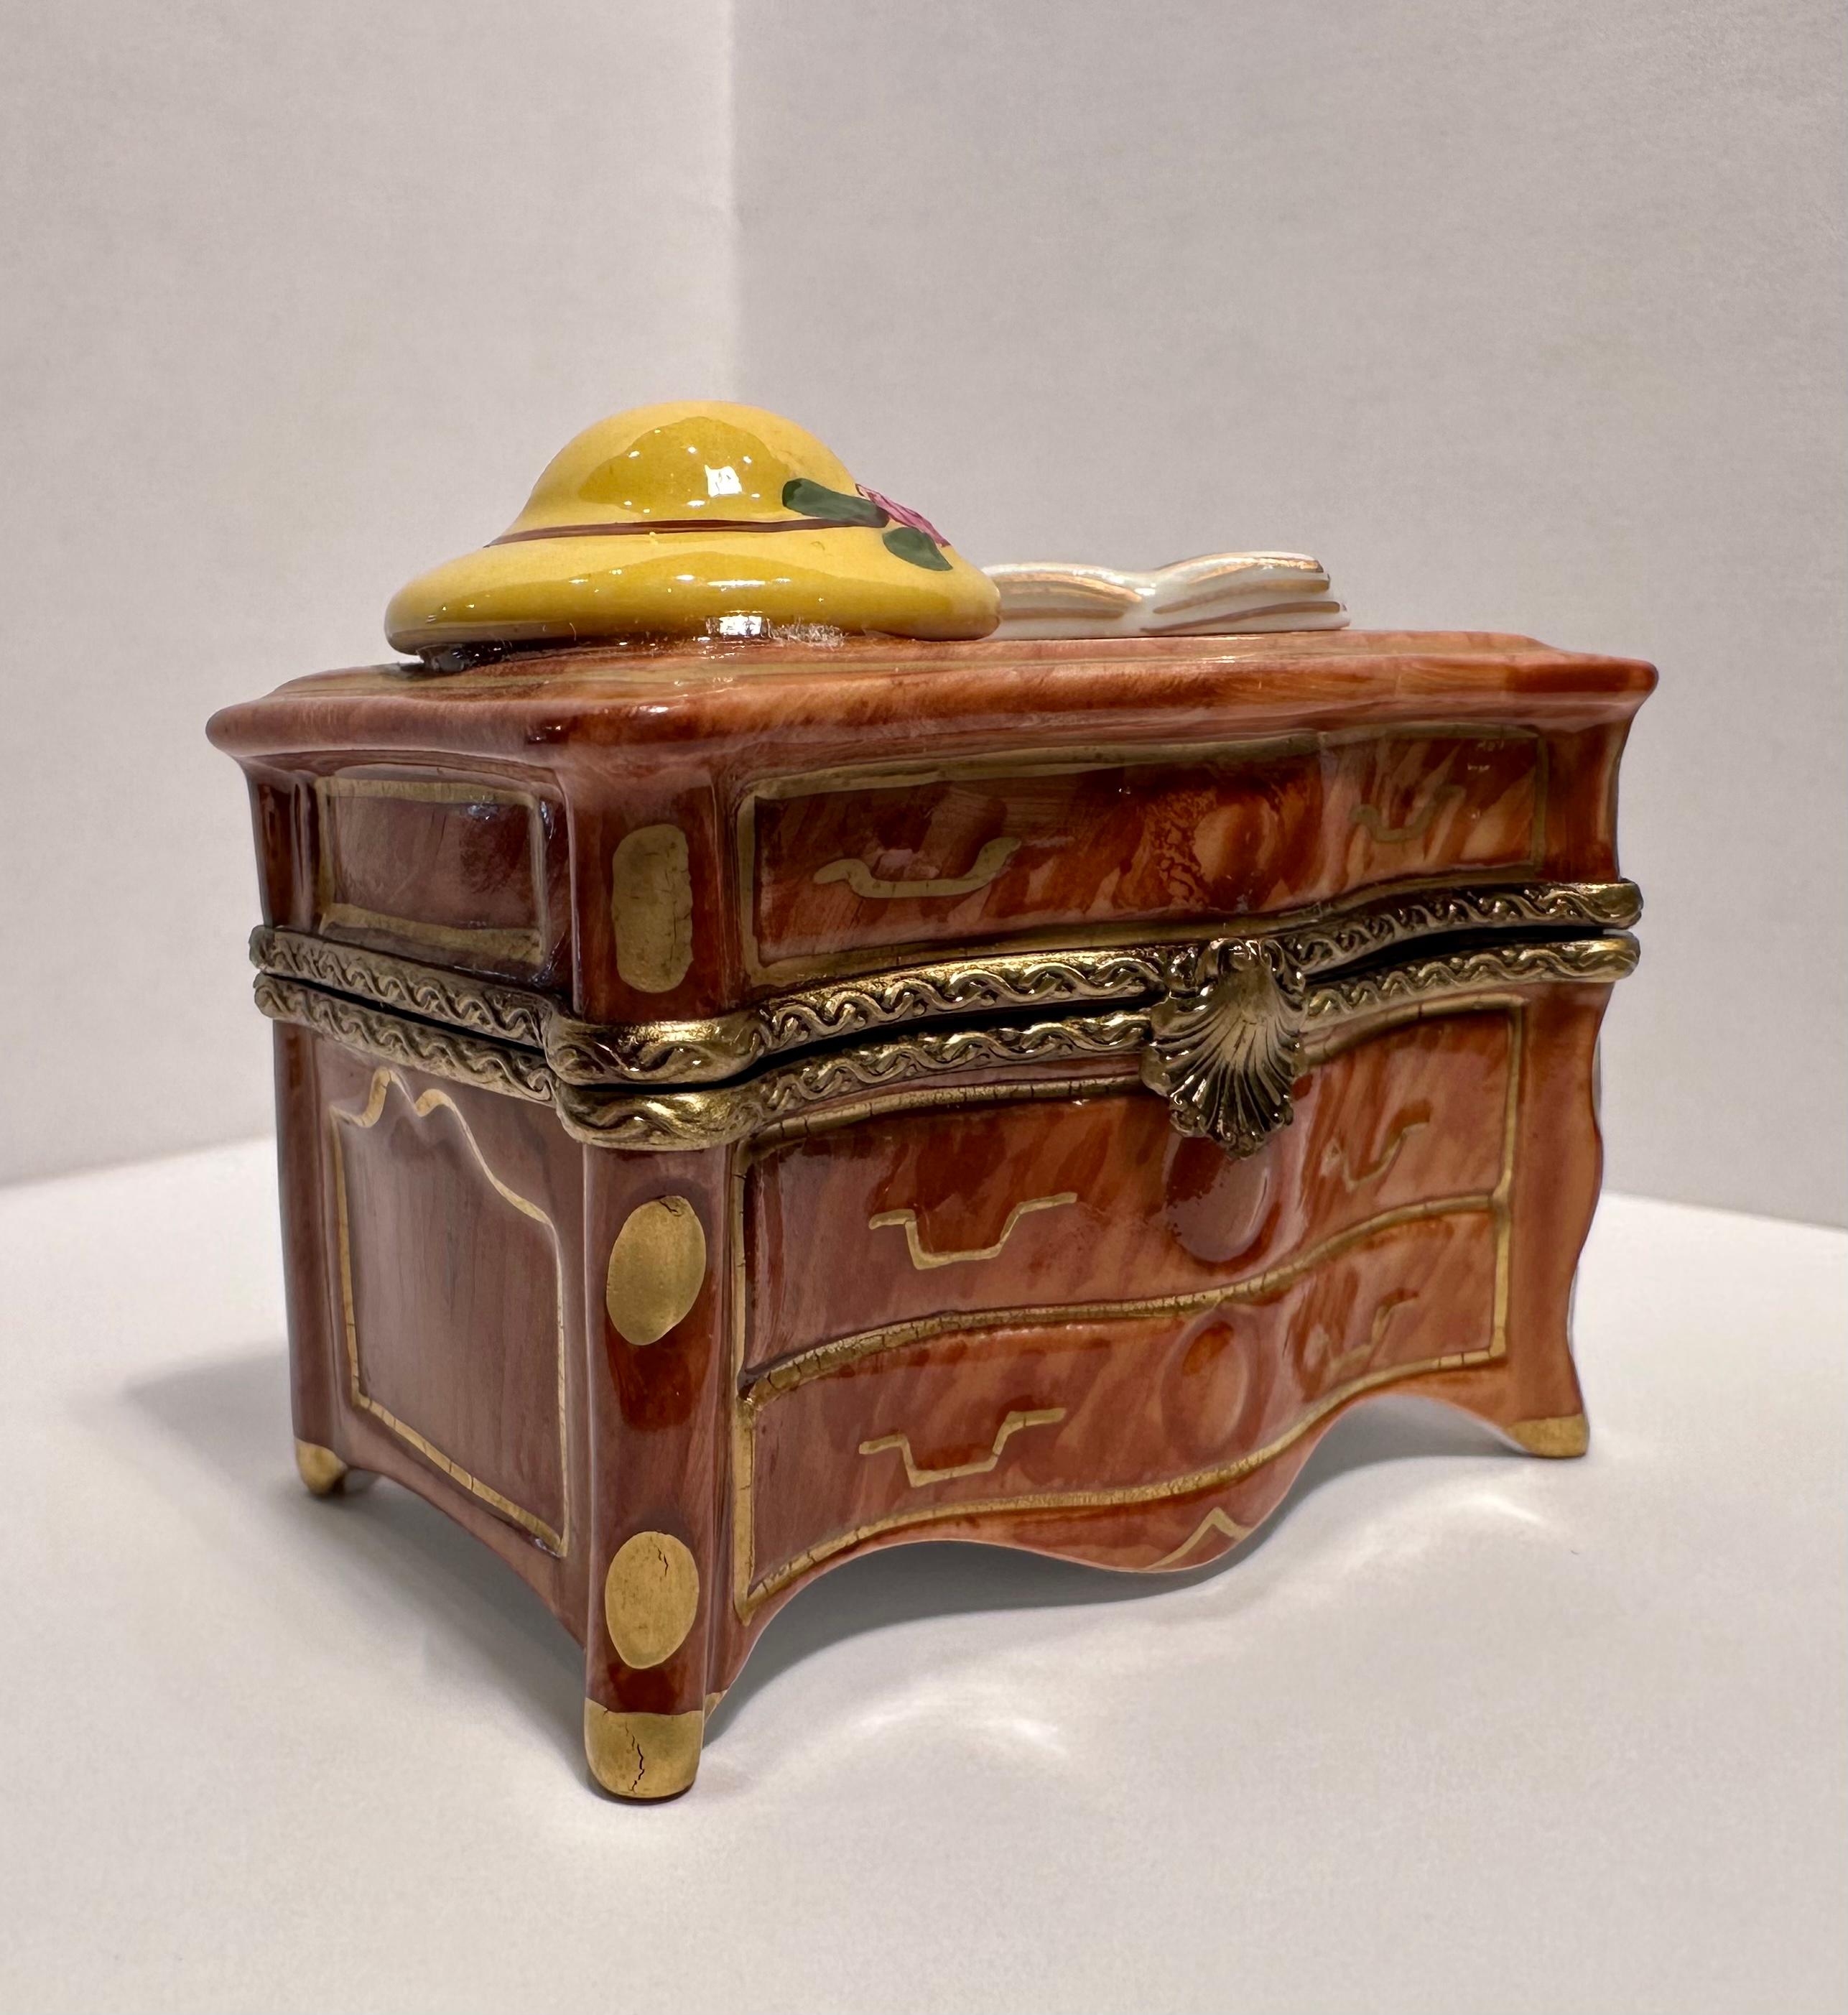 Hand-Painted Limoges France Hand Painted Dresser With Hat & Music Book Porcelain Trinket Box For Sale